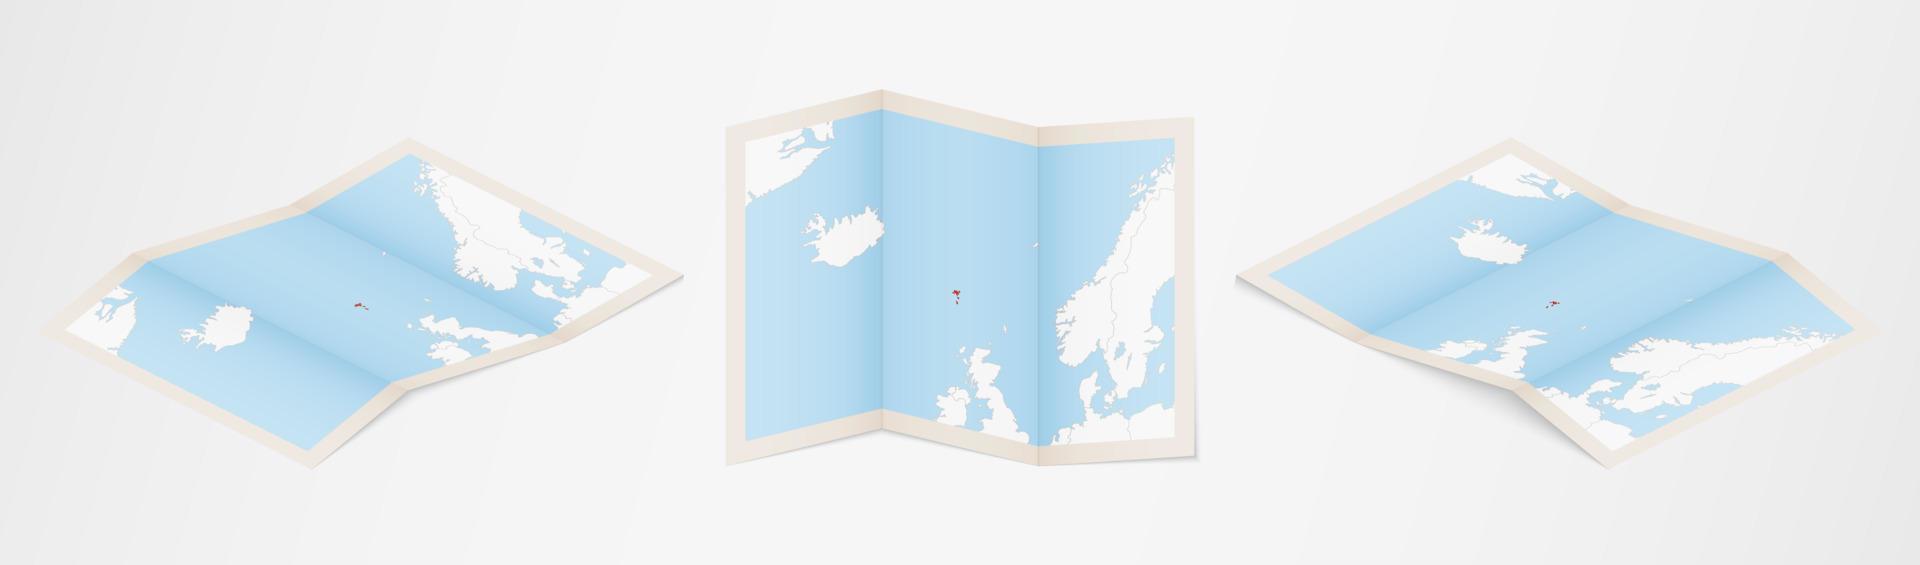 Folded map of Faroe Islands in three different versions. vector